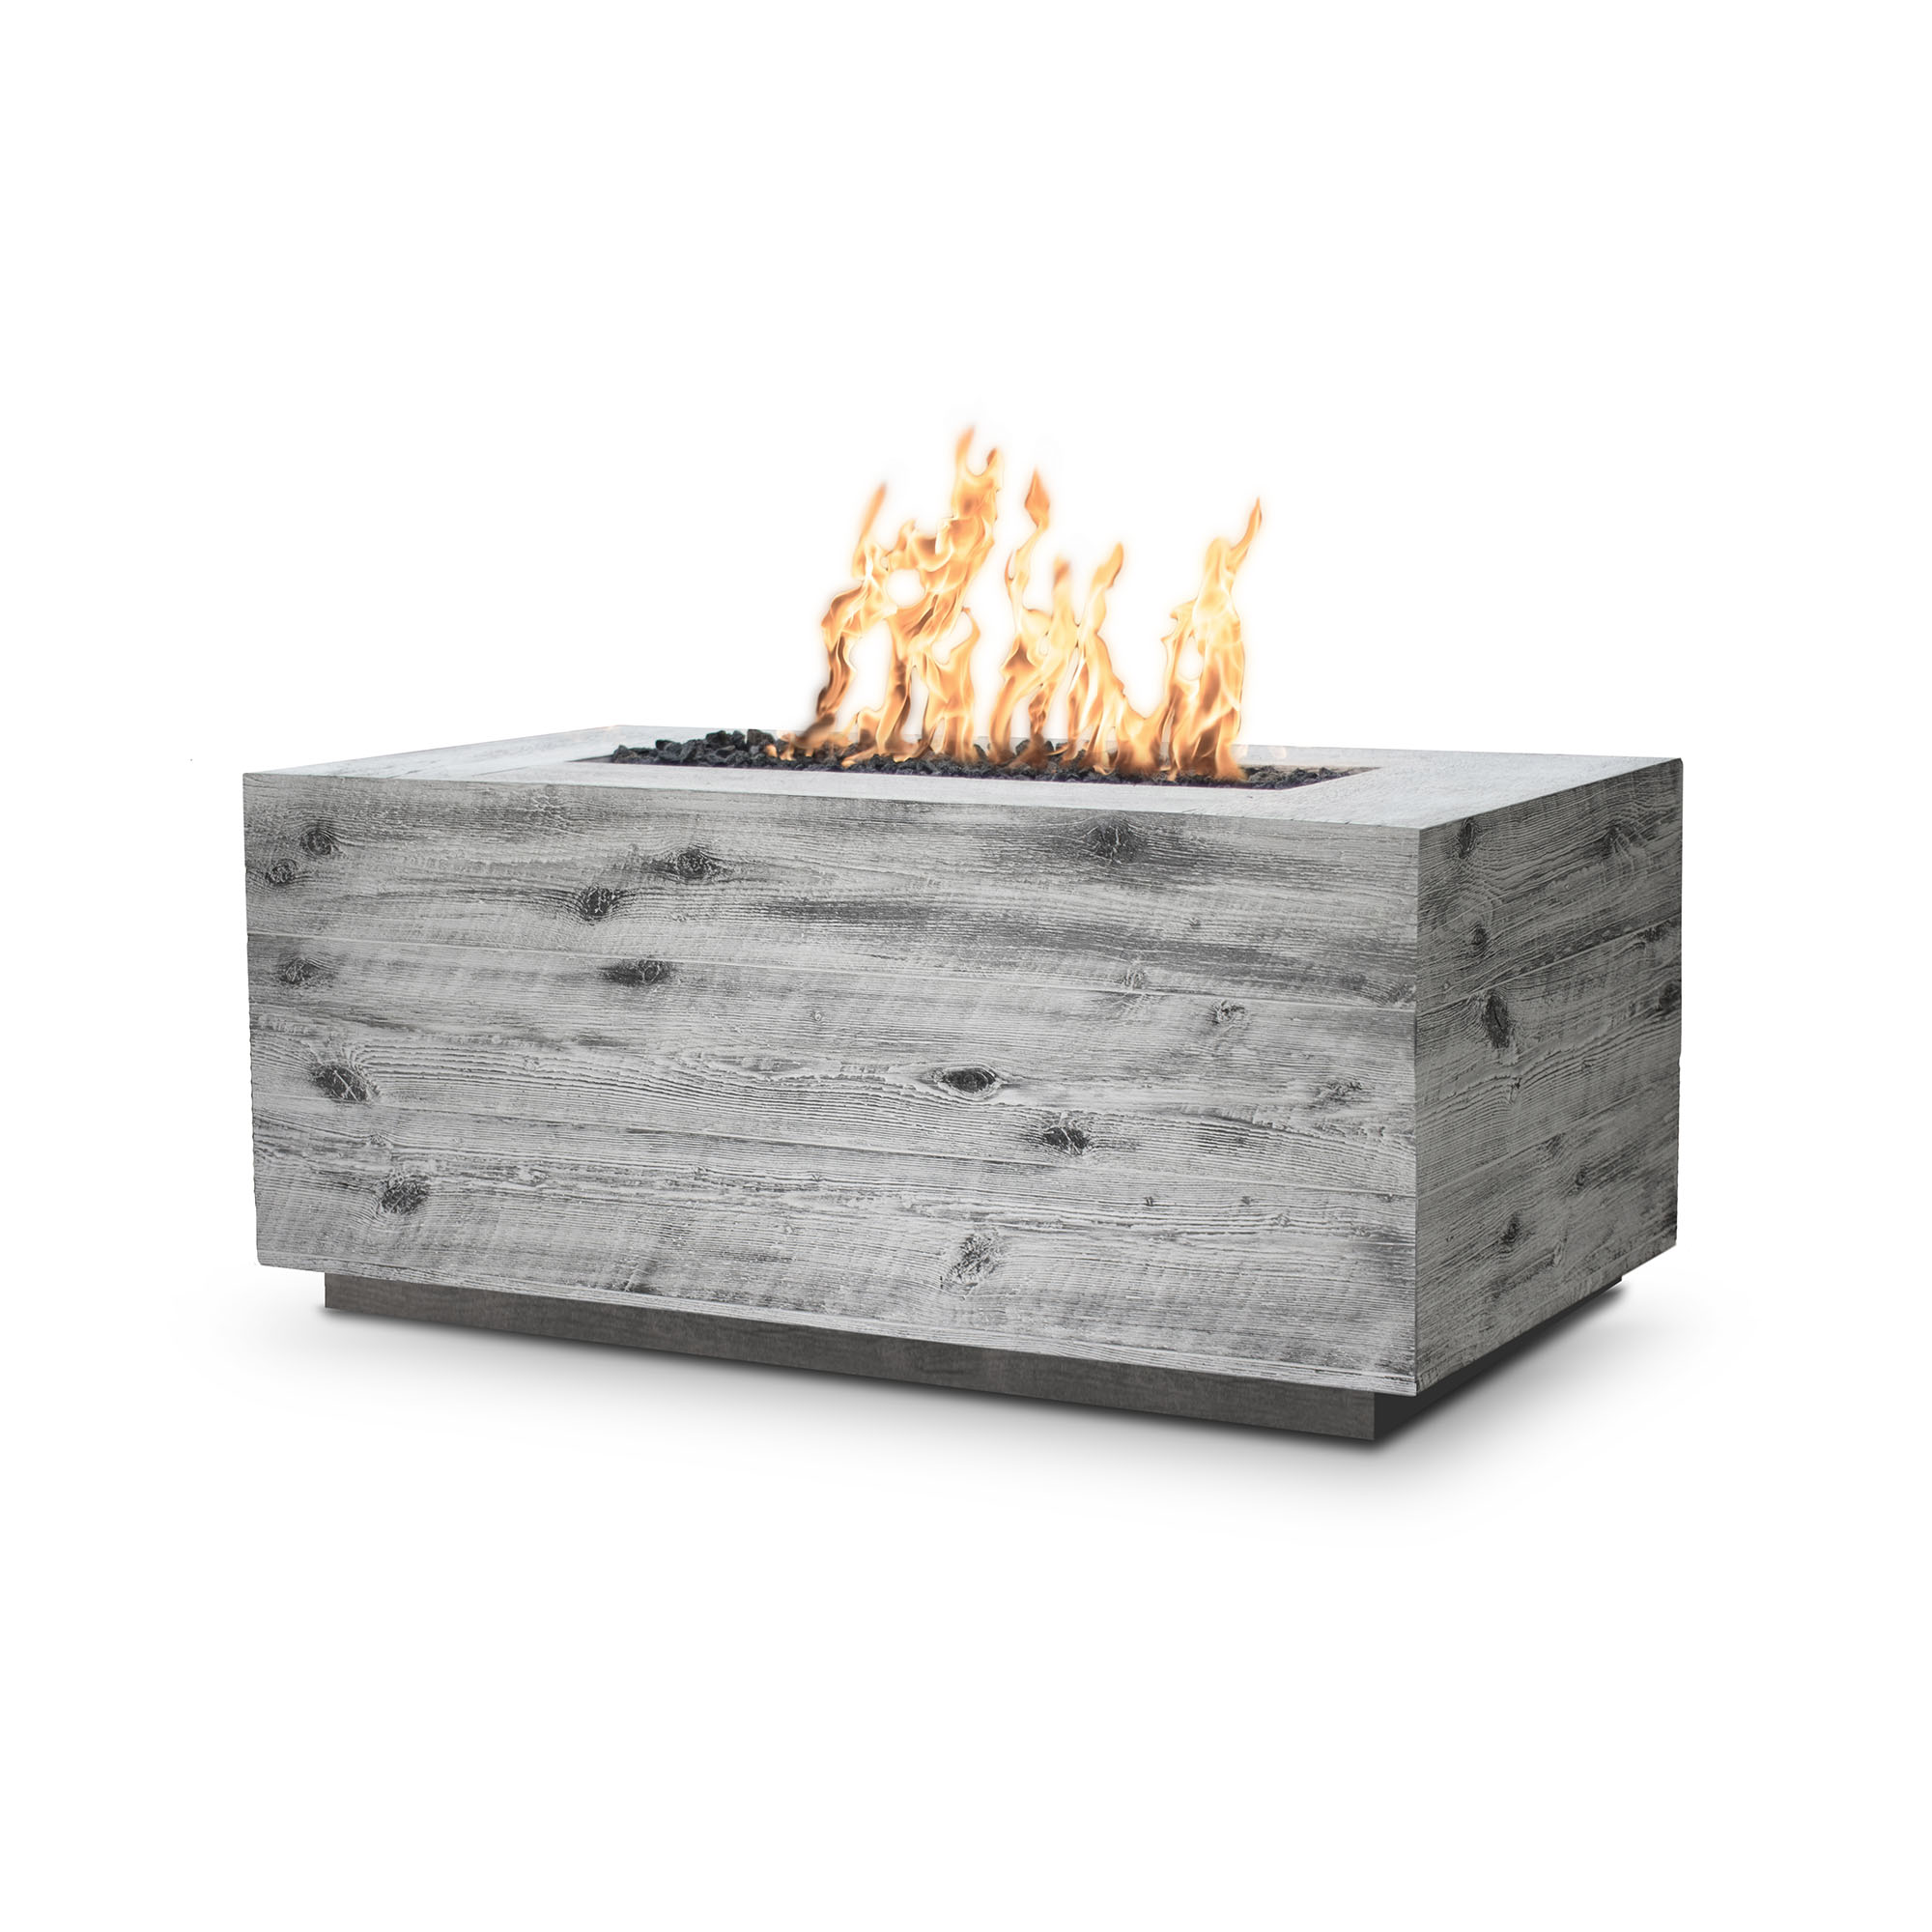 Catalina Fire Pit - Wood Grain - Ivory